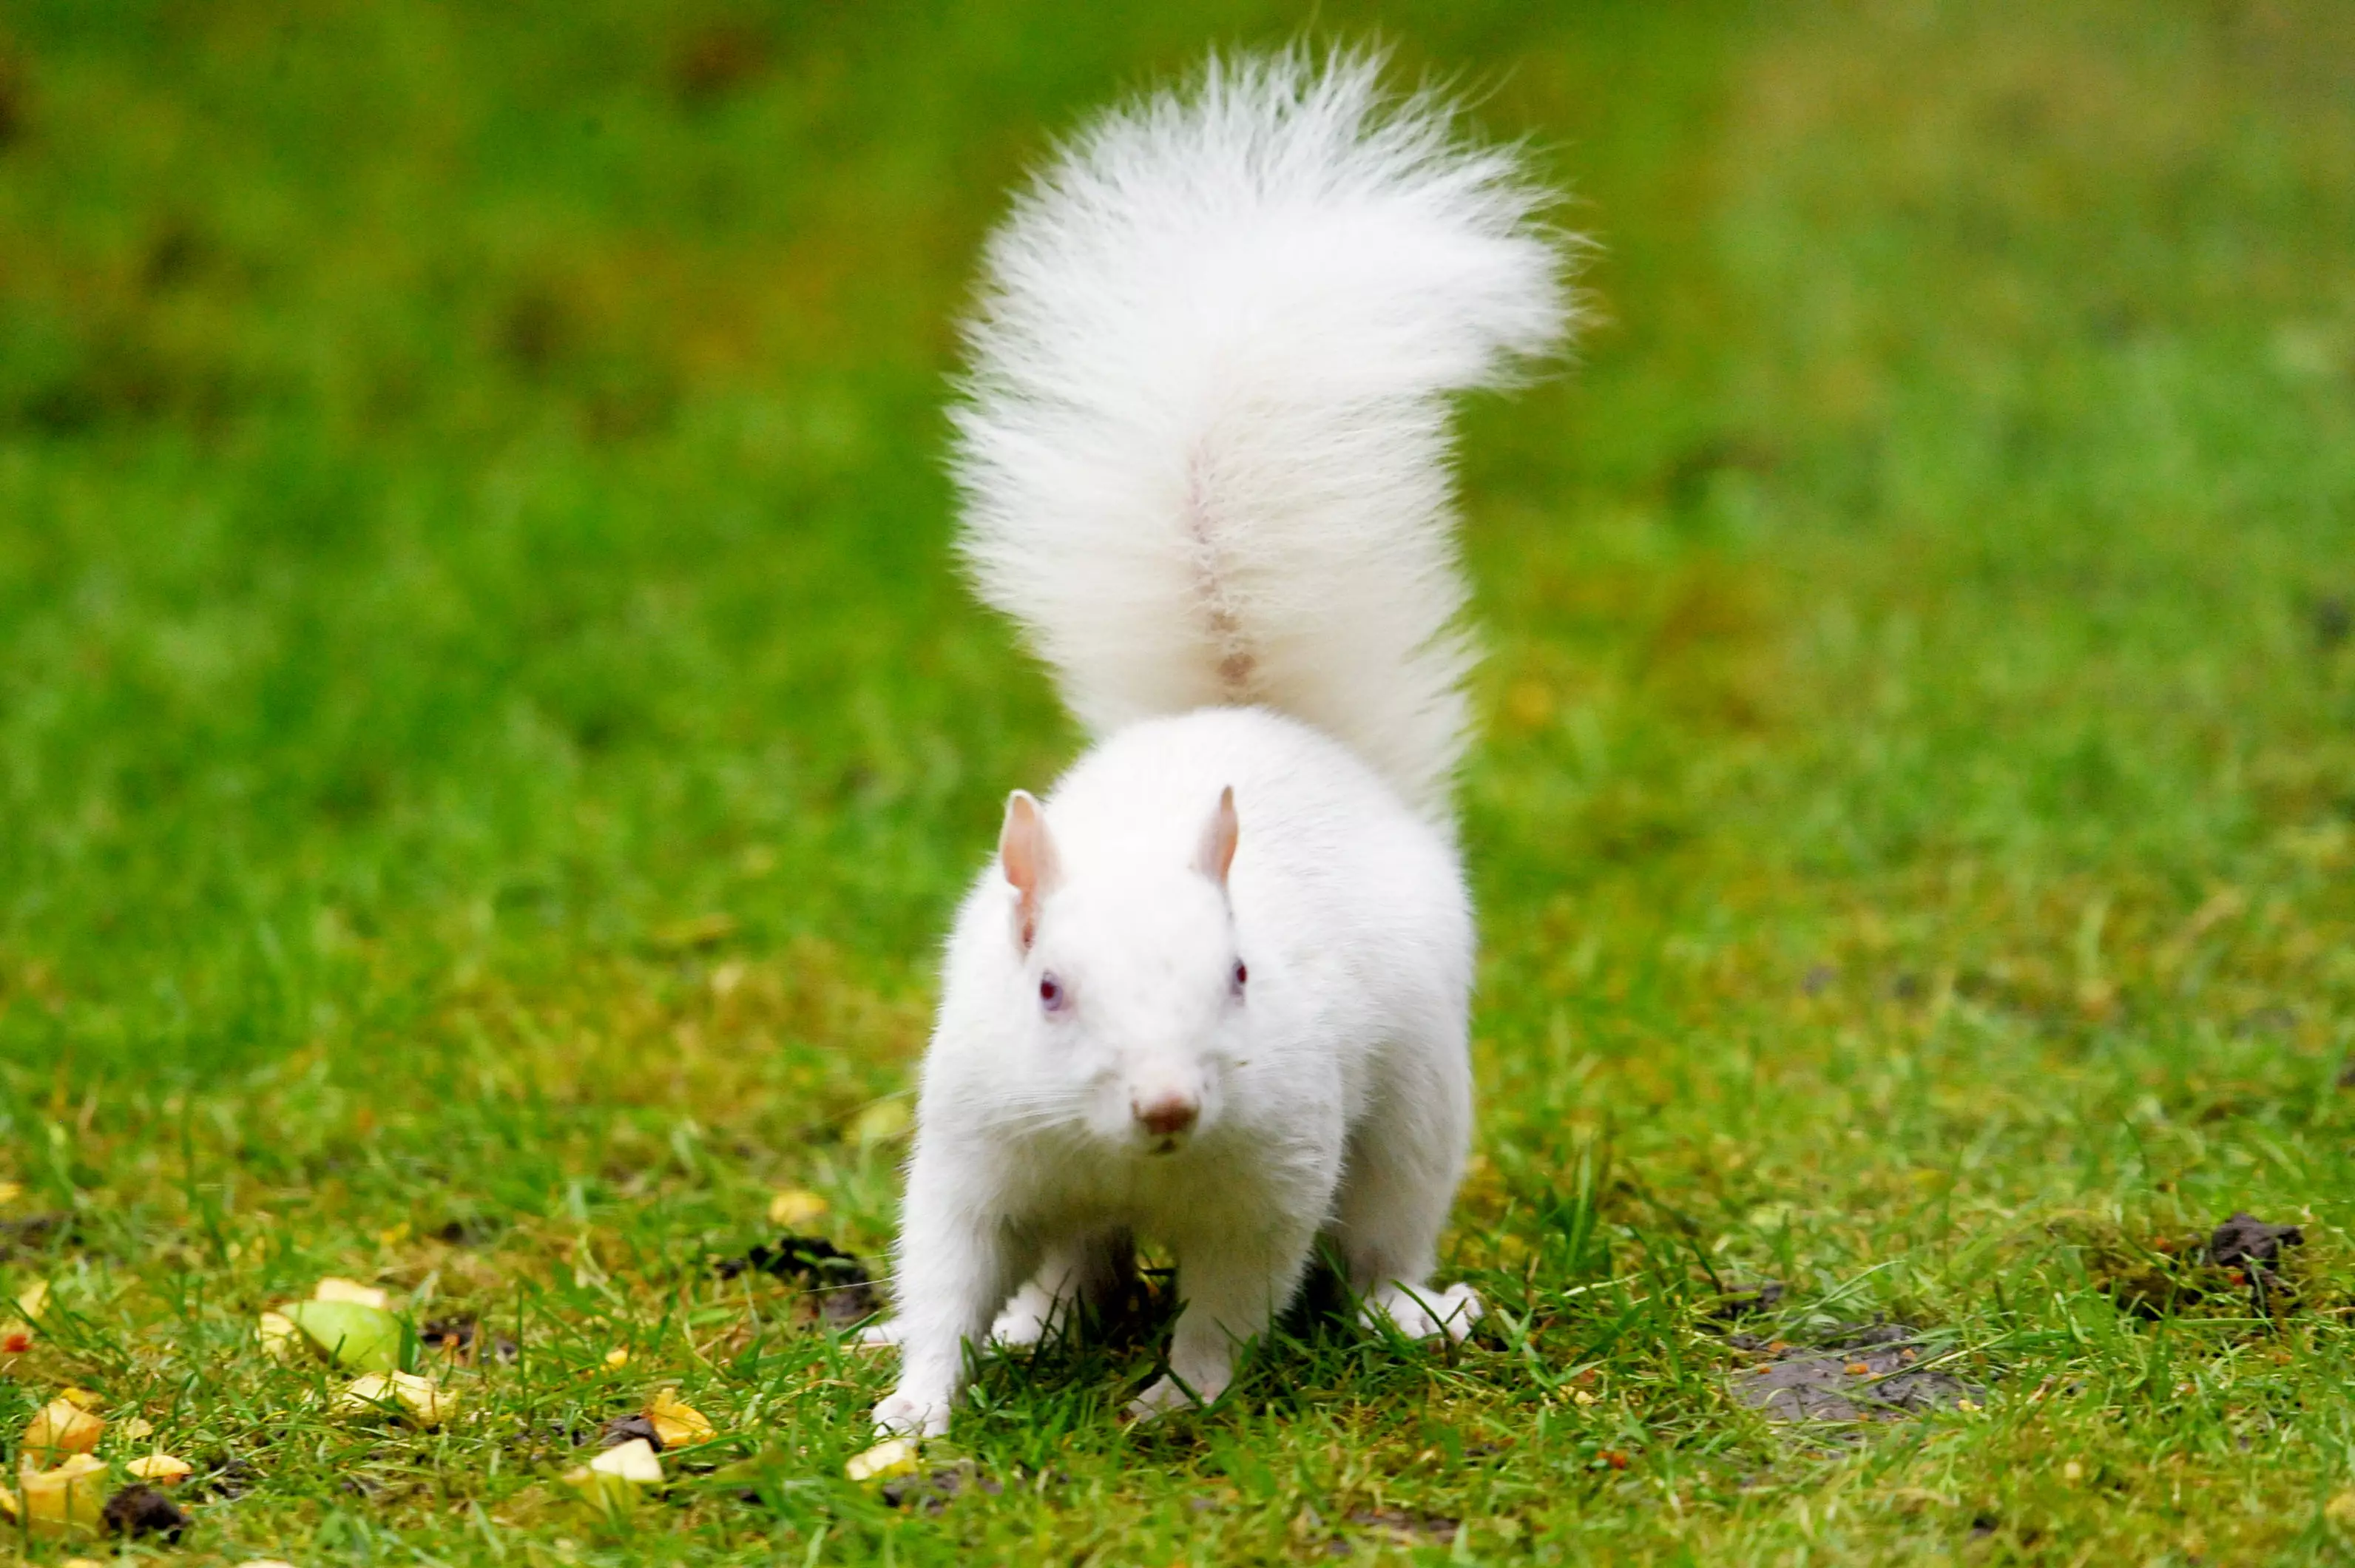 Pictures of a rare albino squirrel scavenging for food.